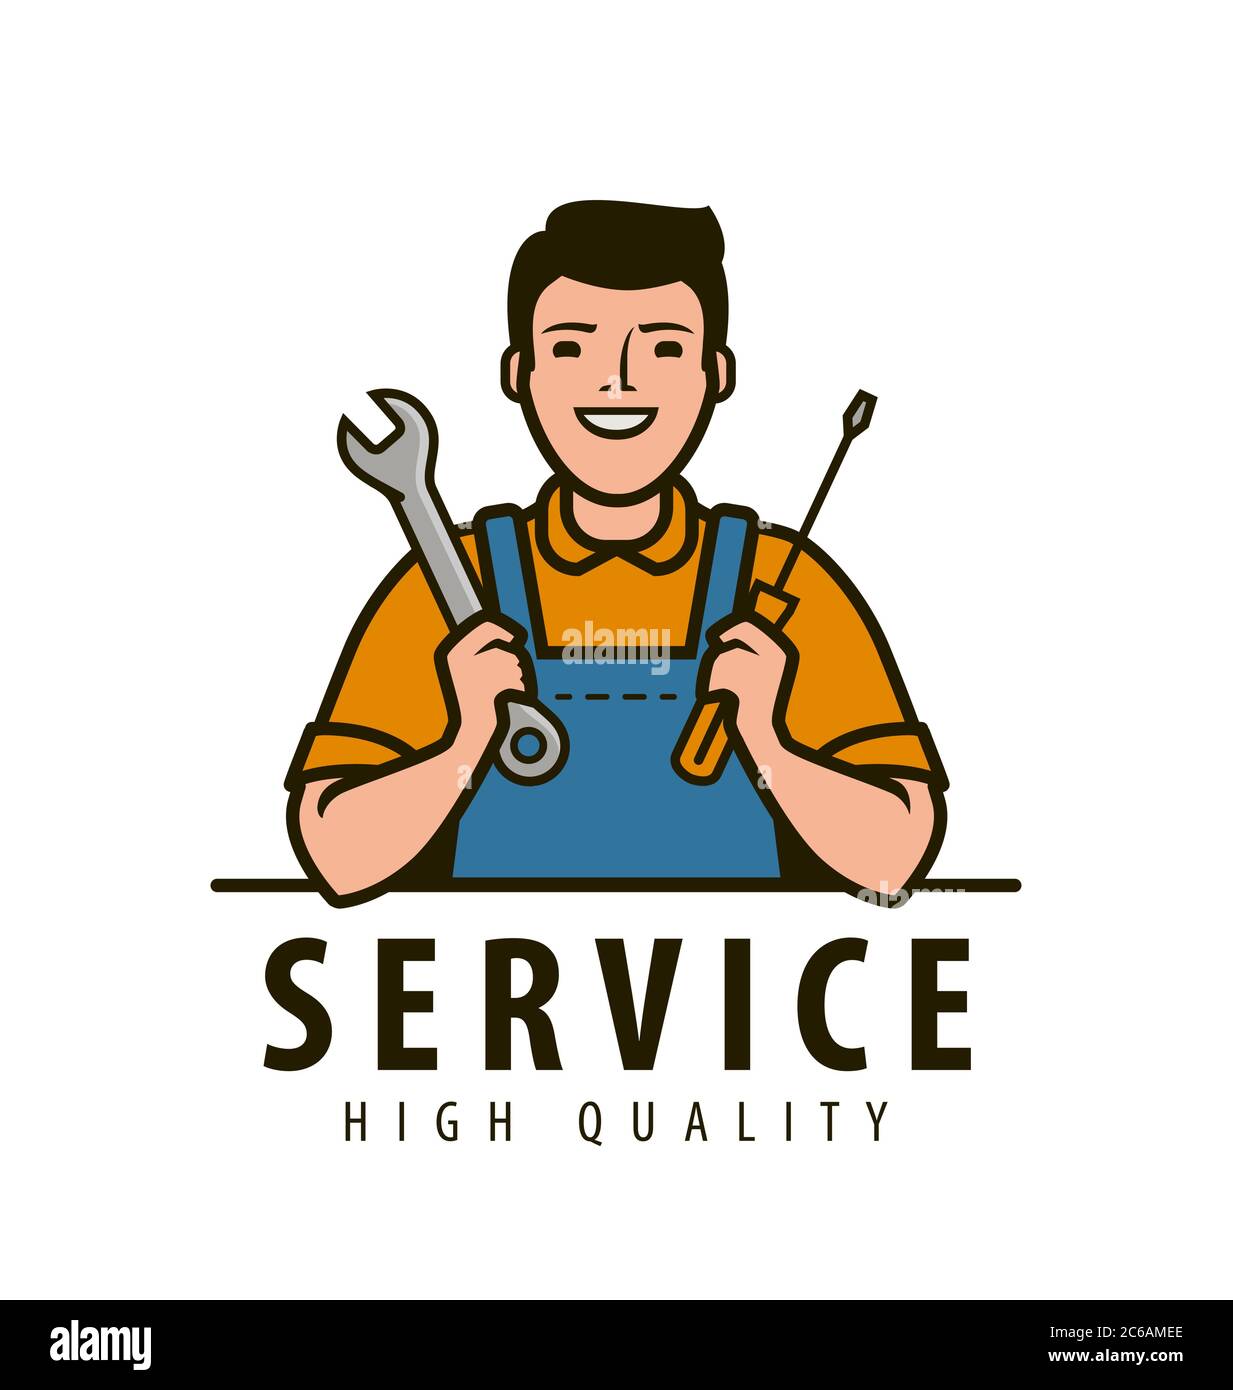 Service, maintenance logo. Technical specialist with tools vector illustration Stock Vector